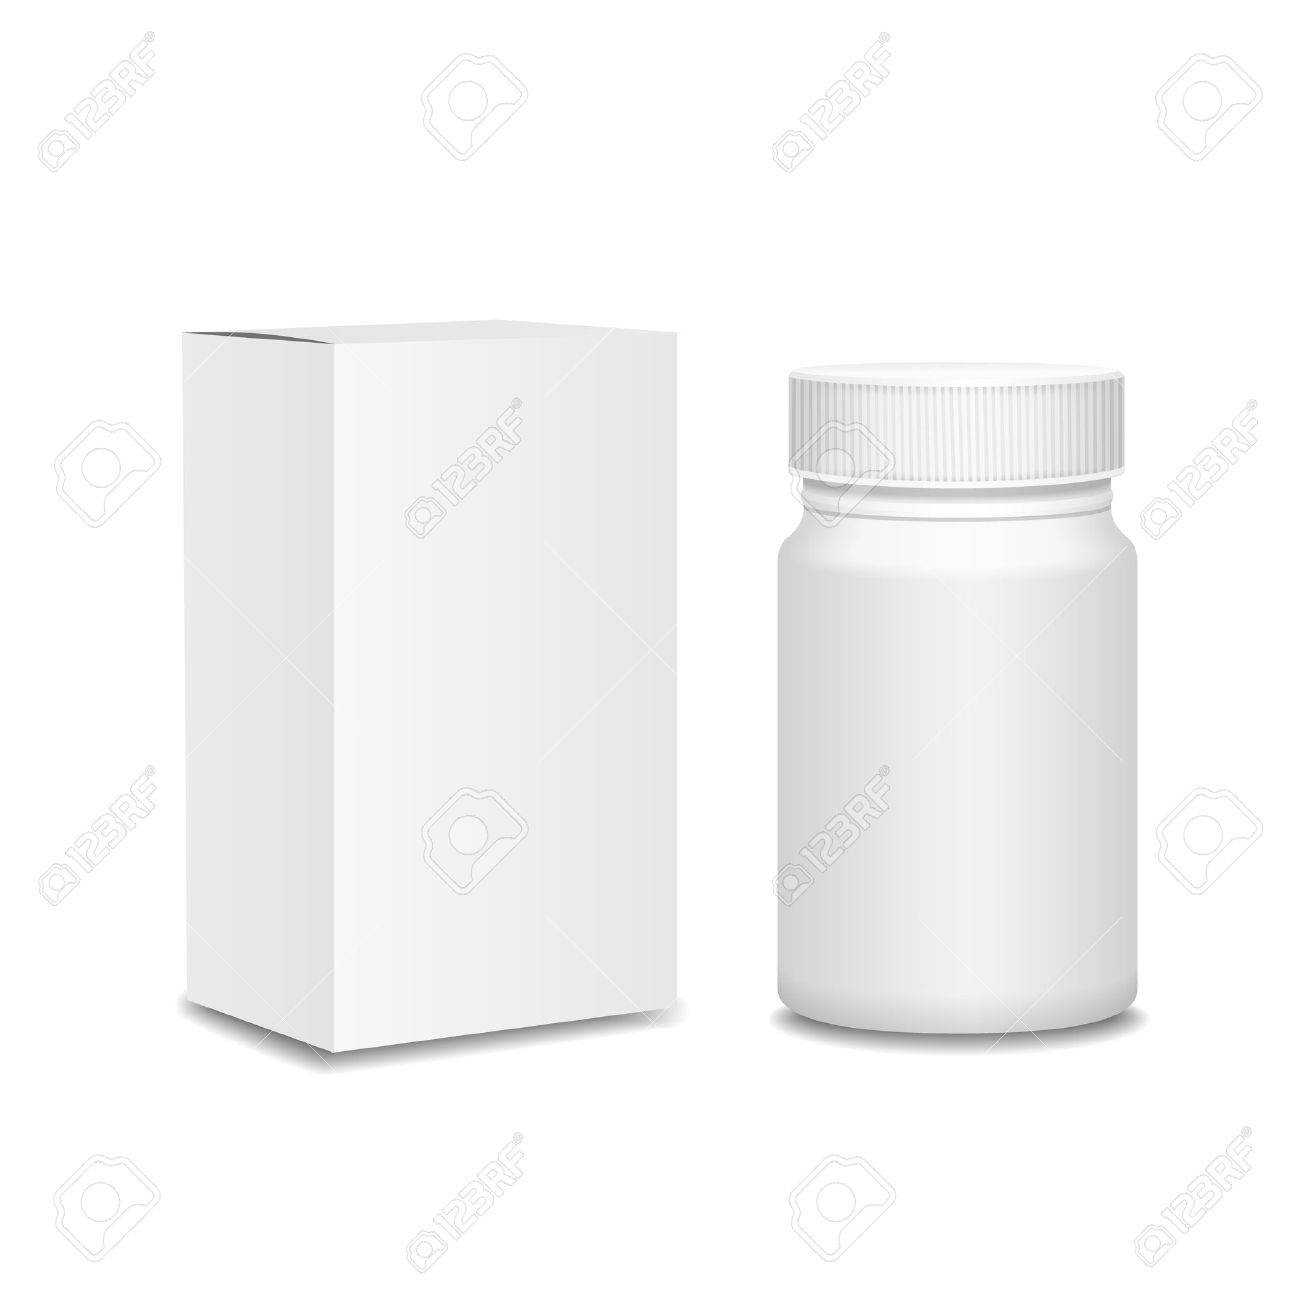 Blank Medicine Bottle And Cardboard Packaging, Vitamins, Examples.. With Regard To Blank Packaging Templates